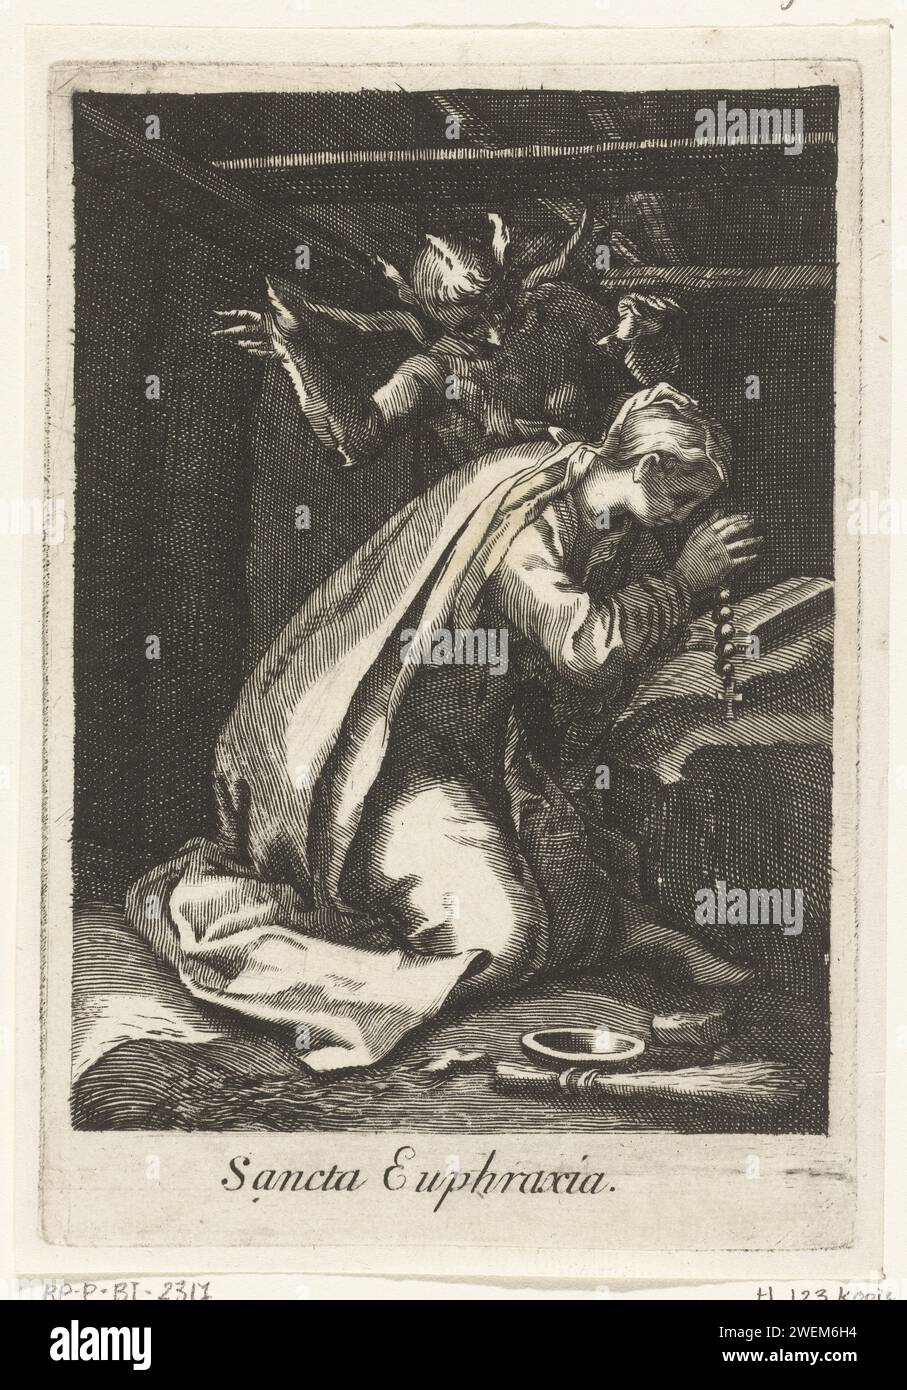 Saint Euphrasia from Constatinople as a recluse, Anonymous, After Boëtius Adamsz. Bolswert, after Abraham Bloemaert, after Gerard Valck, 1590 - 1662 print Sacred Euphrasia of Constantinople as a recliner kneels in prayer in her recluse cell and is tempted by the devil.  paper engraving female saints. anchorite, hermit Stock Photo